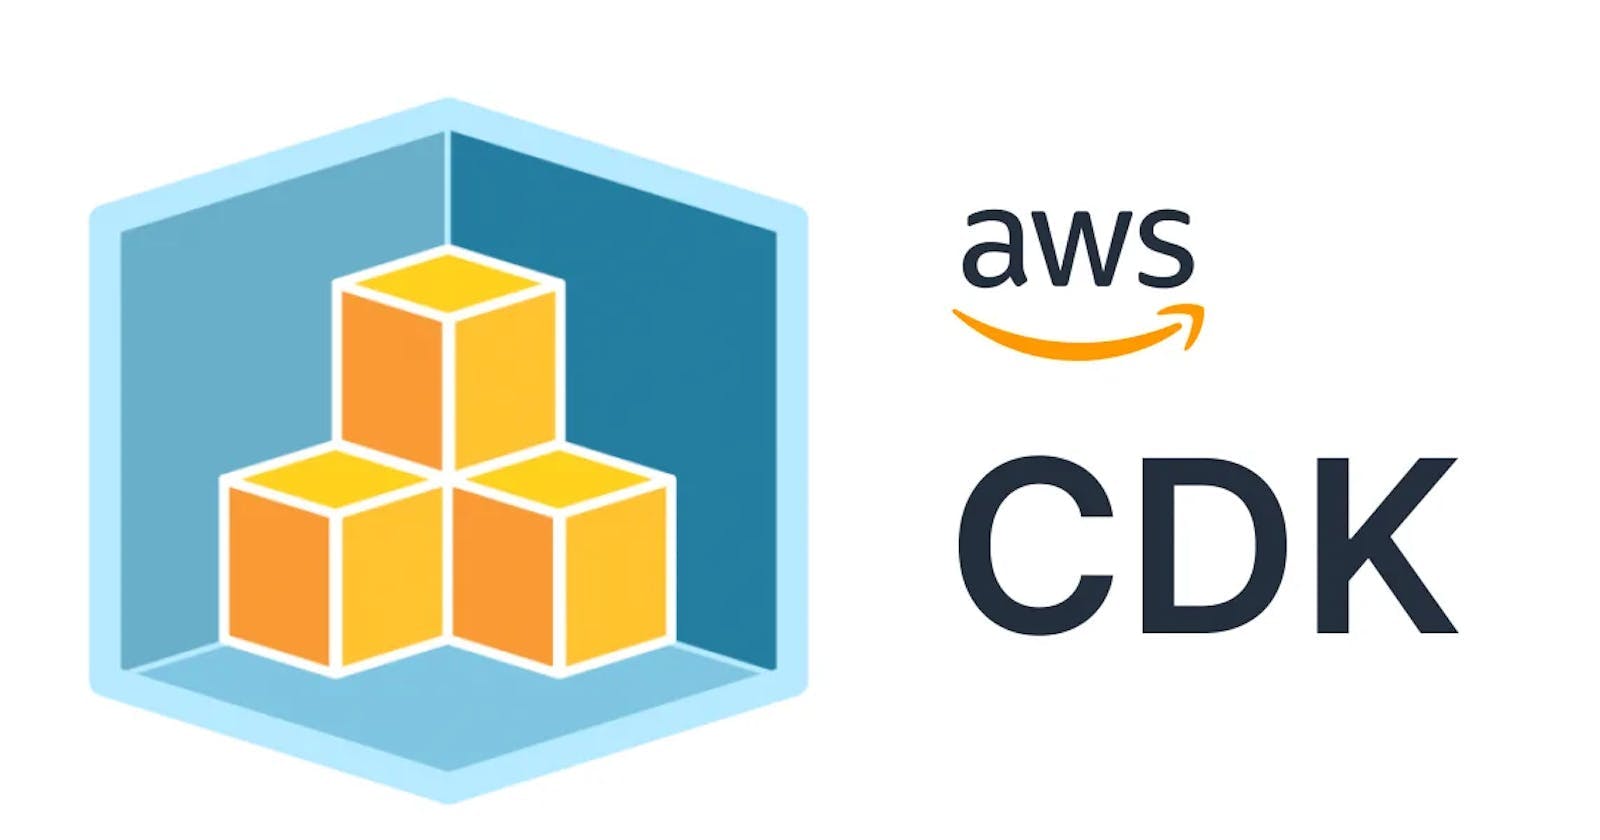 What is Context and its Significance in AWS CDK